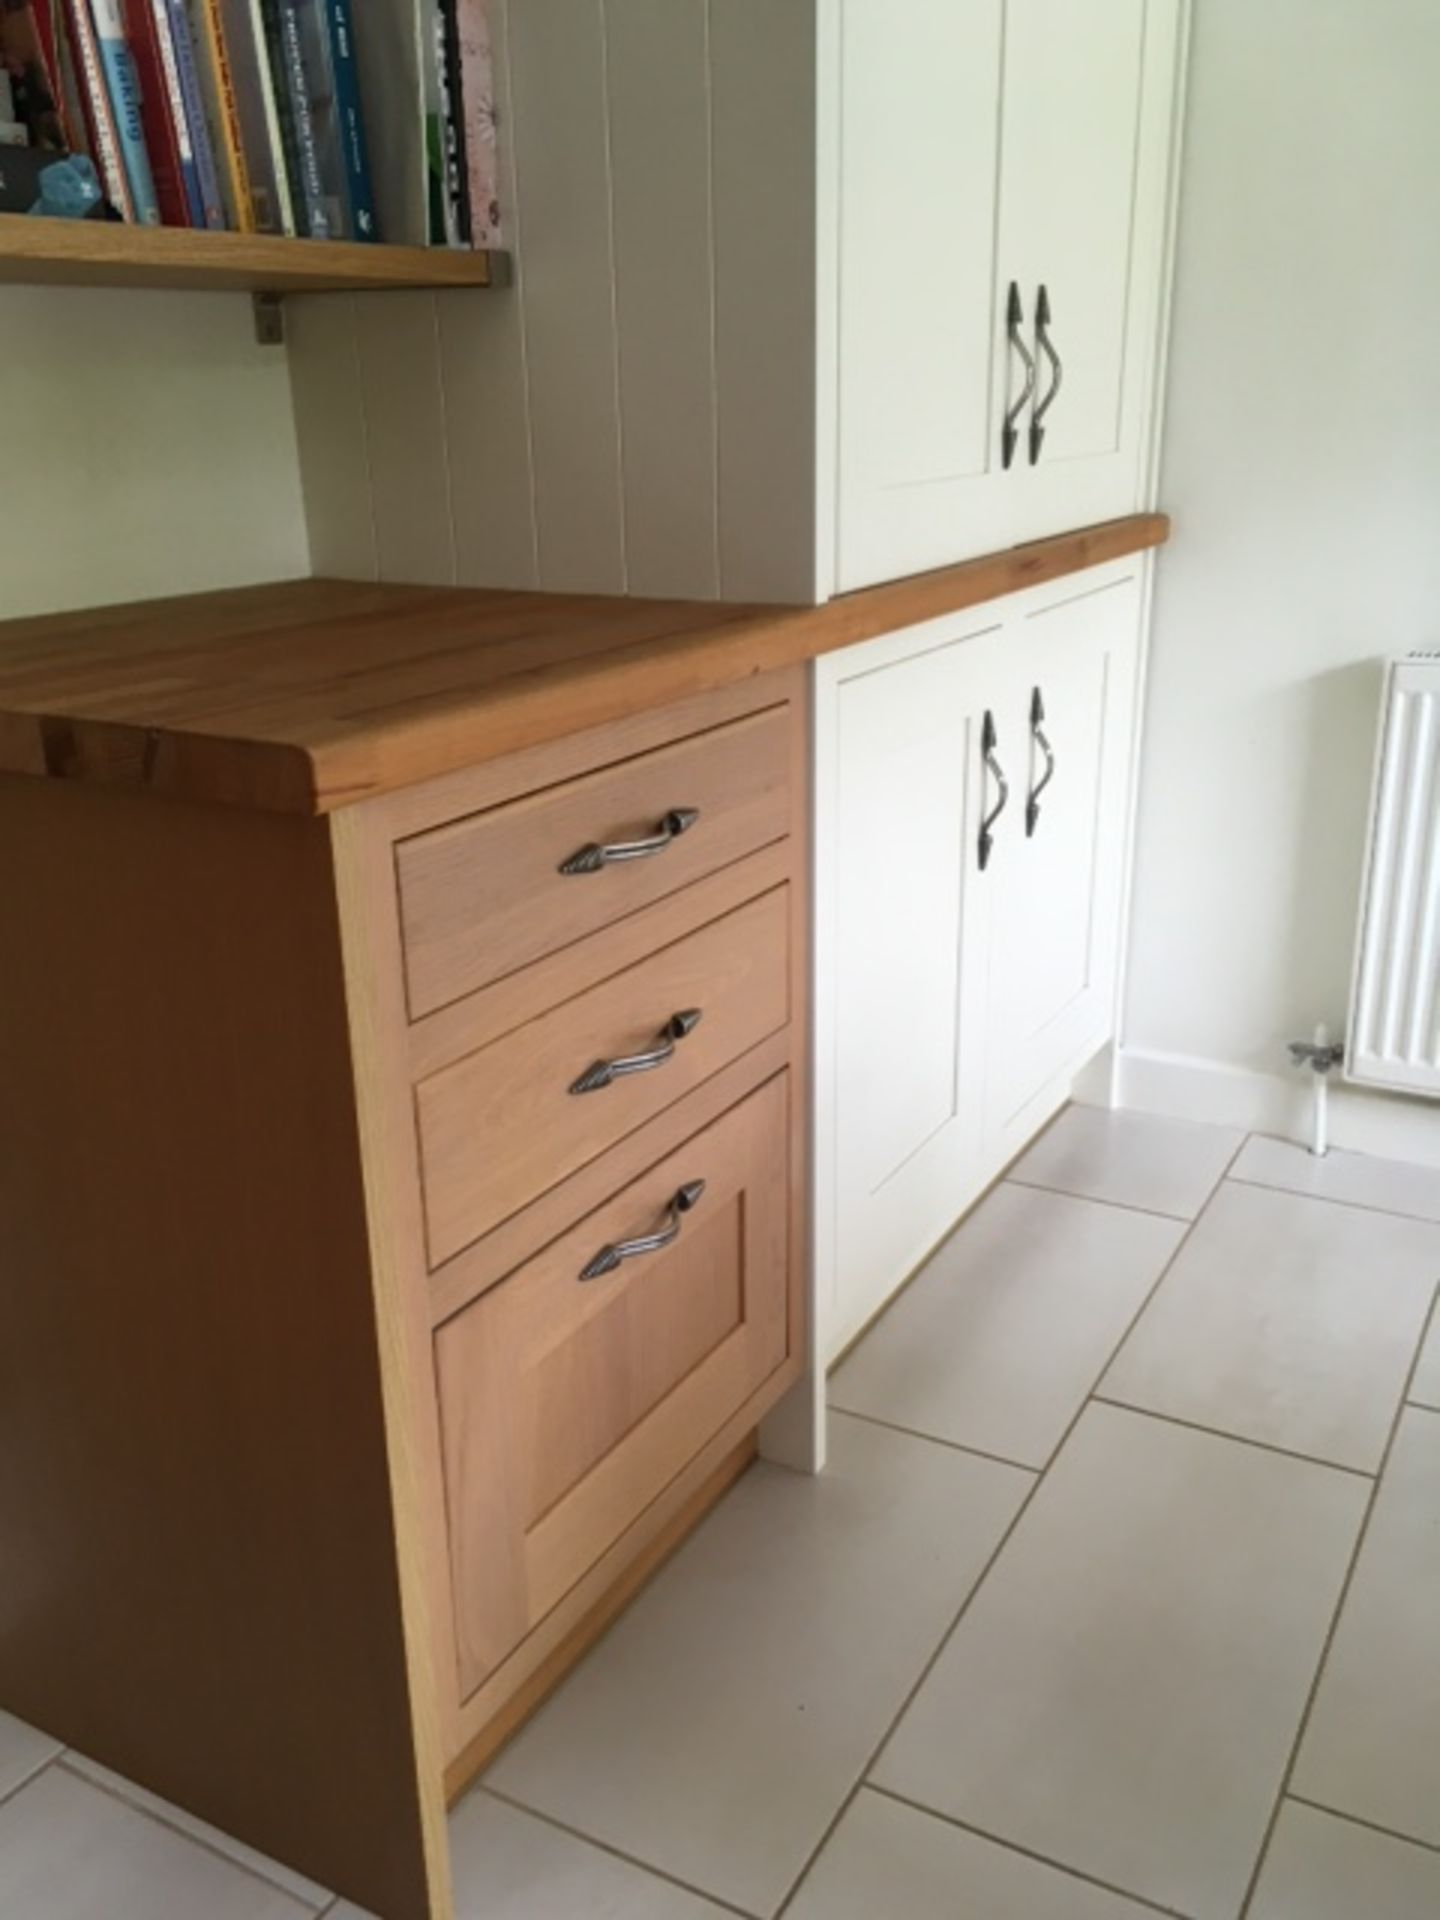 1 x Bespoke Solid Wood Fitted Kitchen With Granite Worktops - Pre-owned In Good Condtion - CL172 - - Image 12 of 22